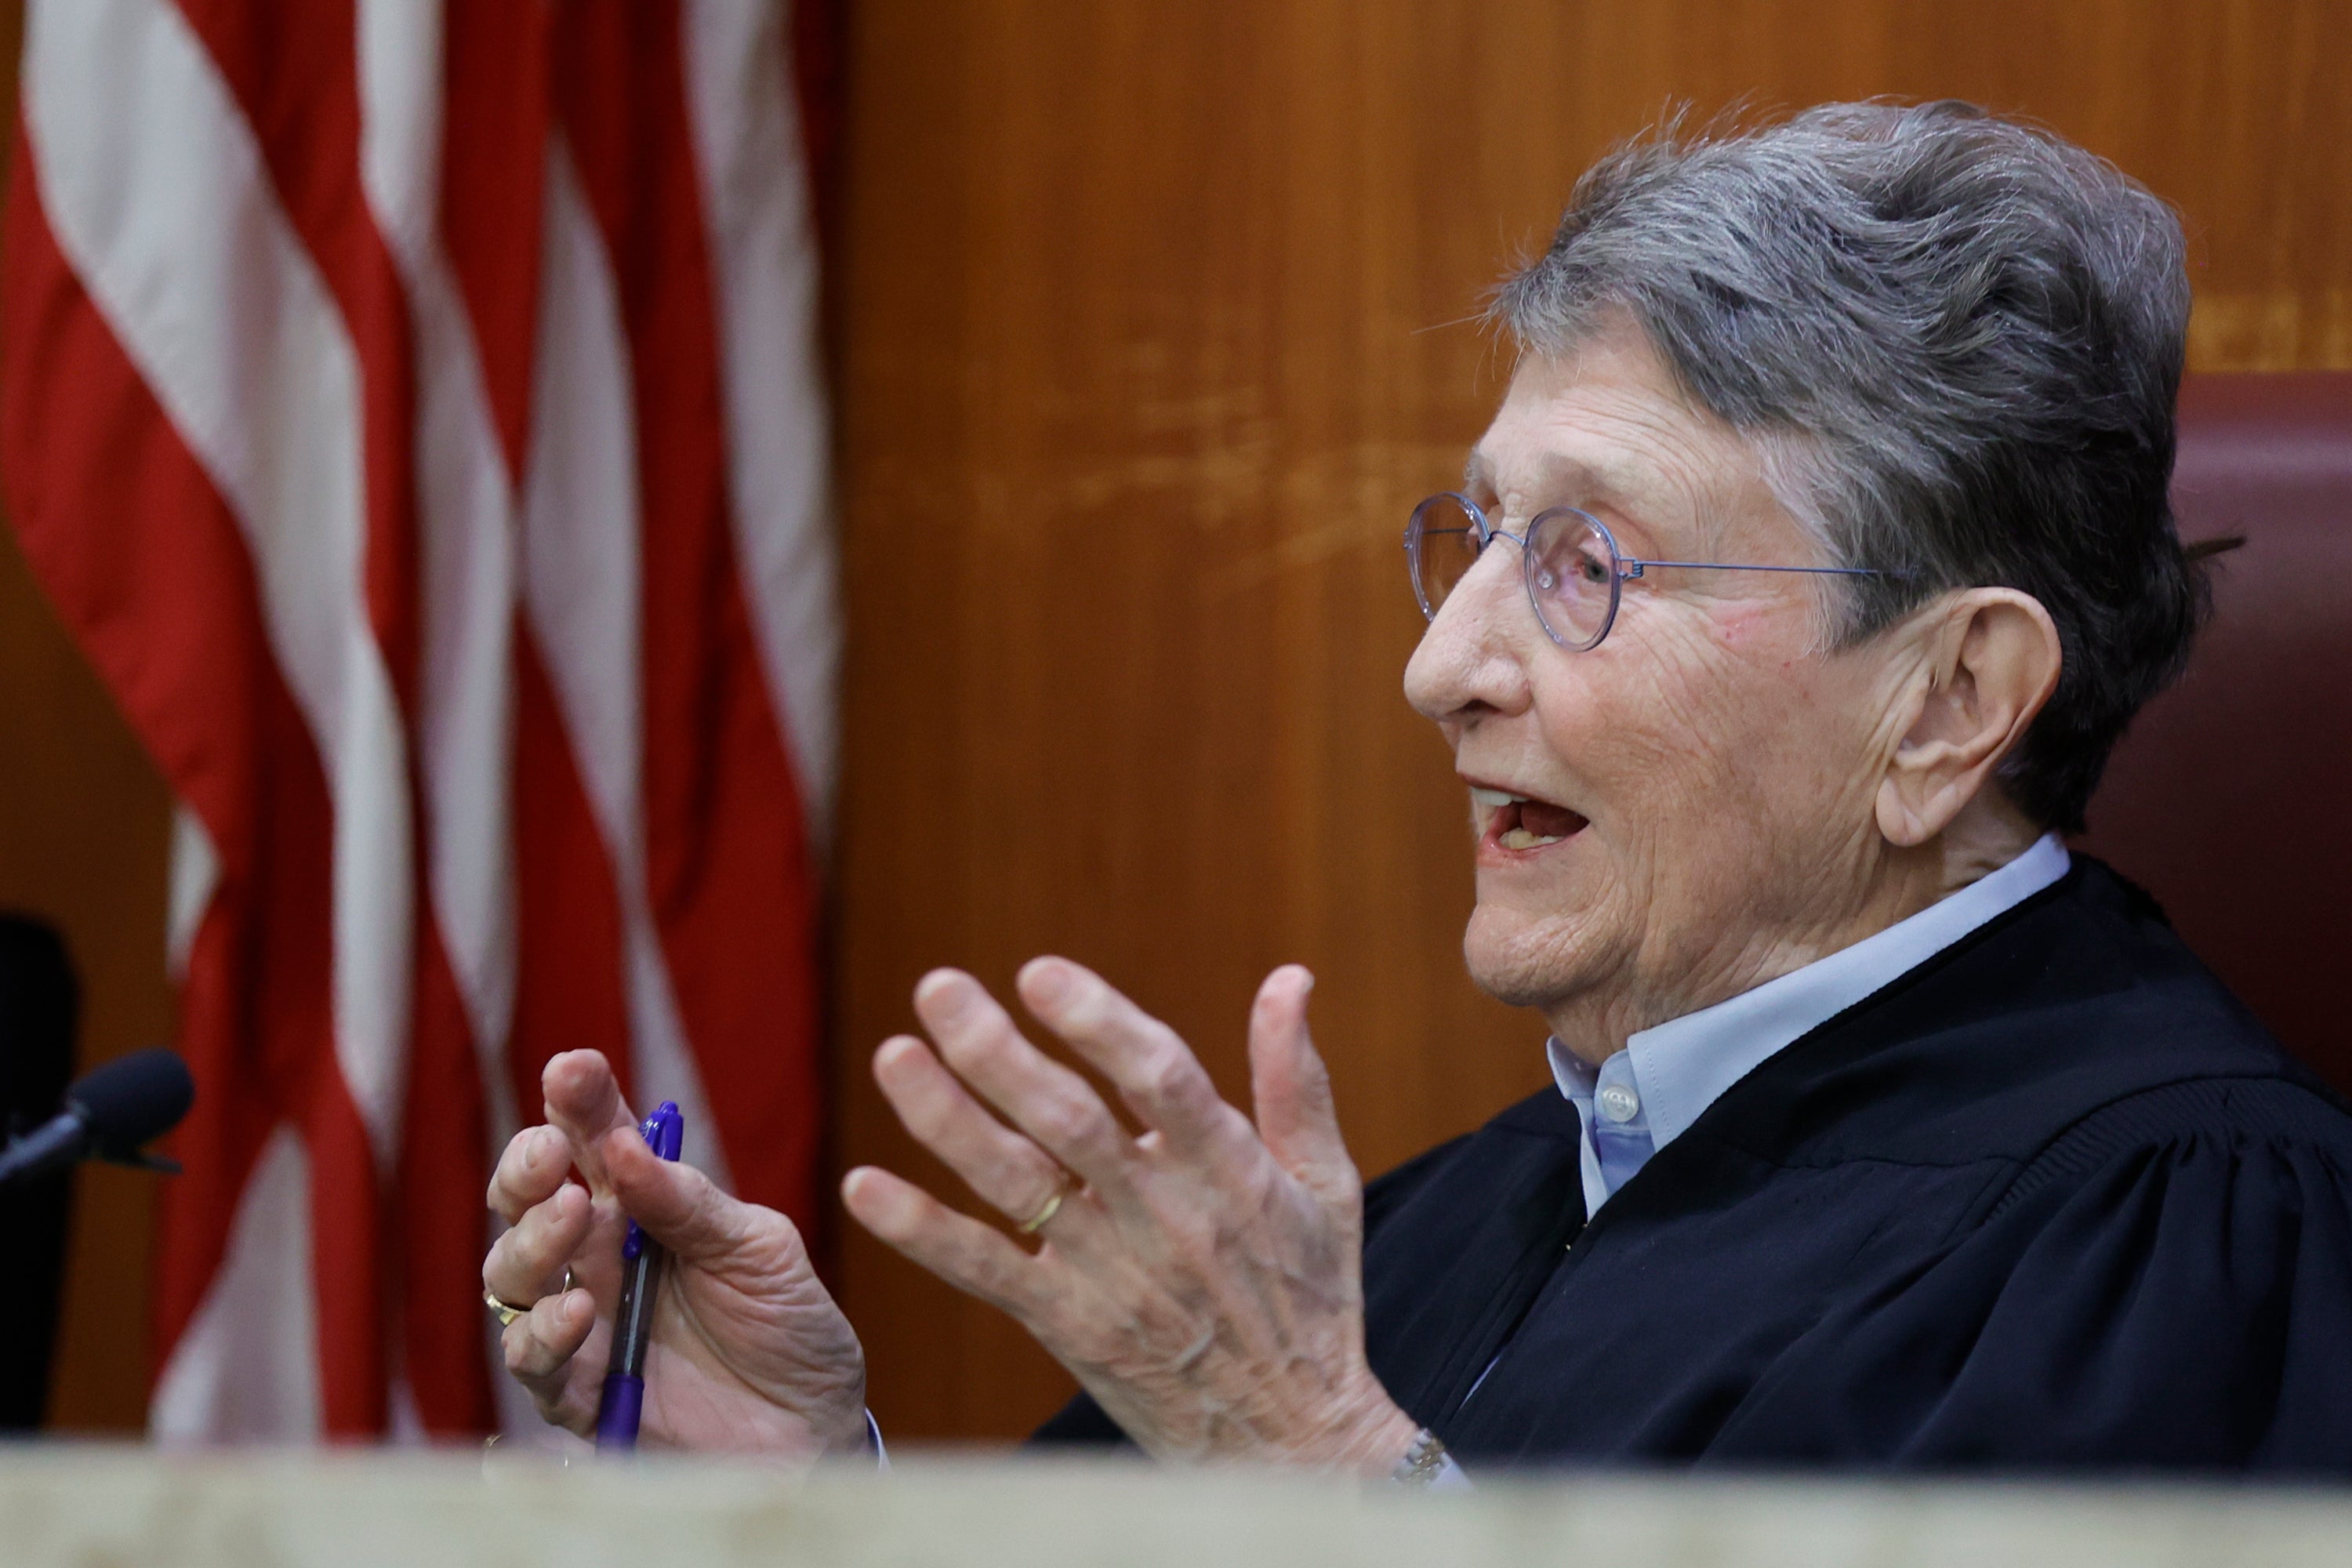 Judge Jean Toal, former South Carolina Supreme Court Justice, presides during a hearing on a motion for Alex Murdaugh’s retrial on 16 January